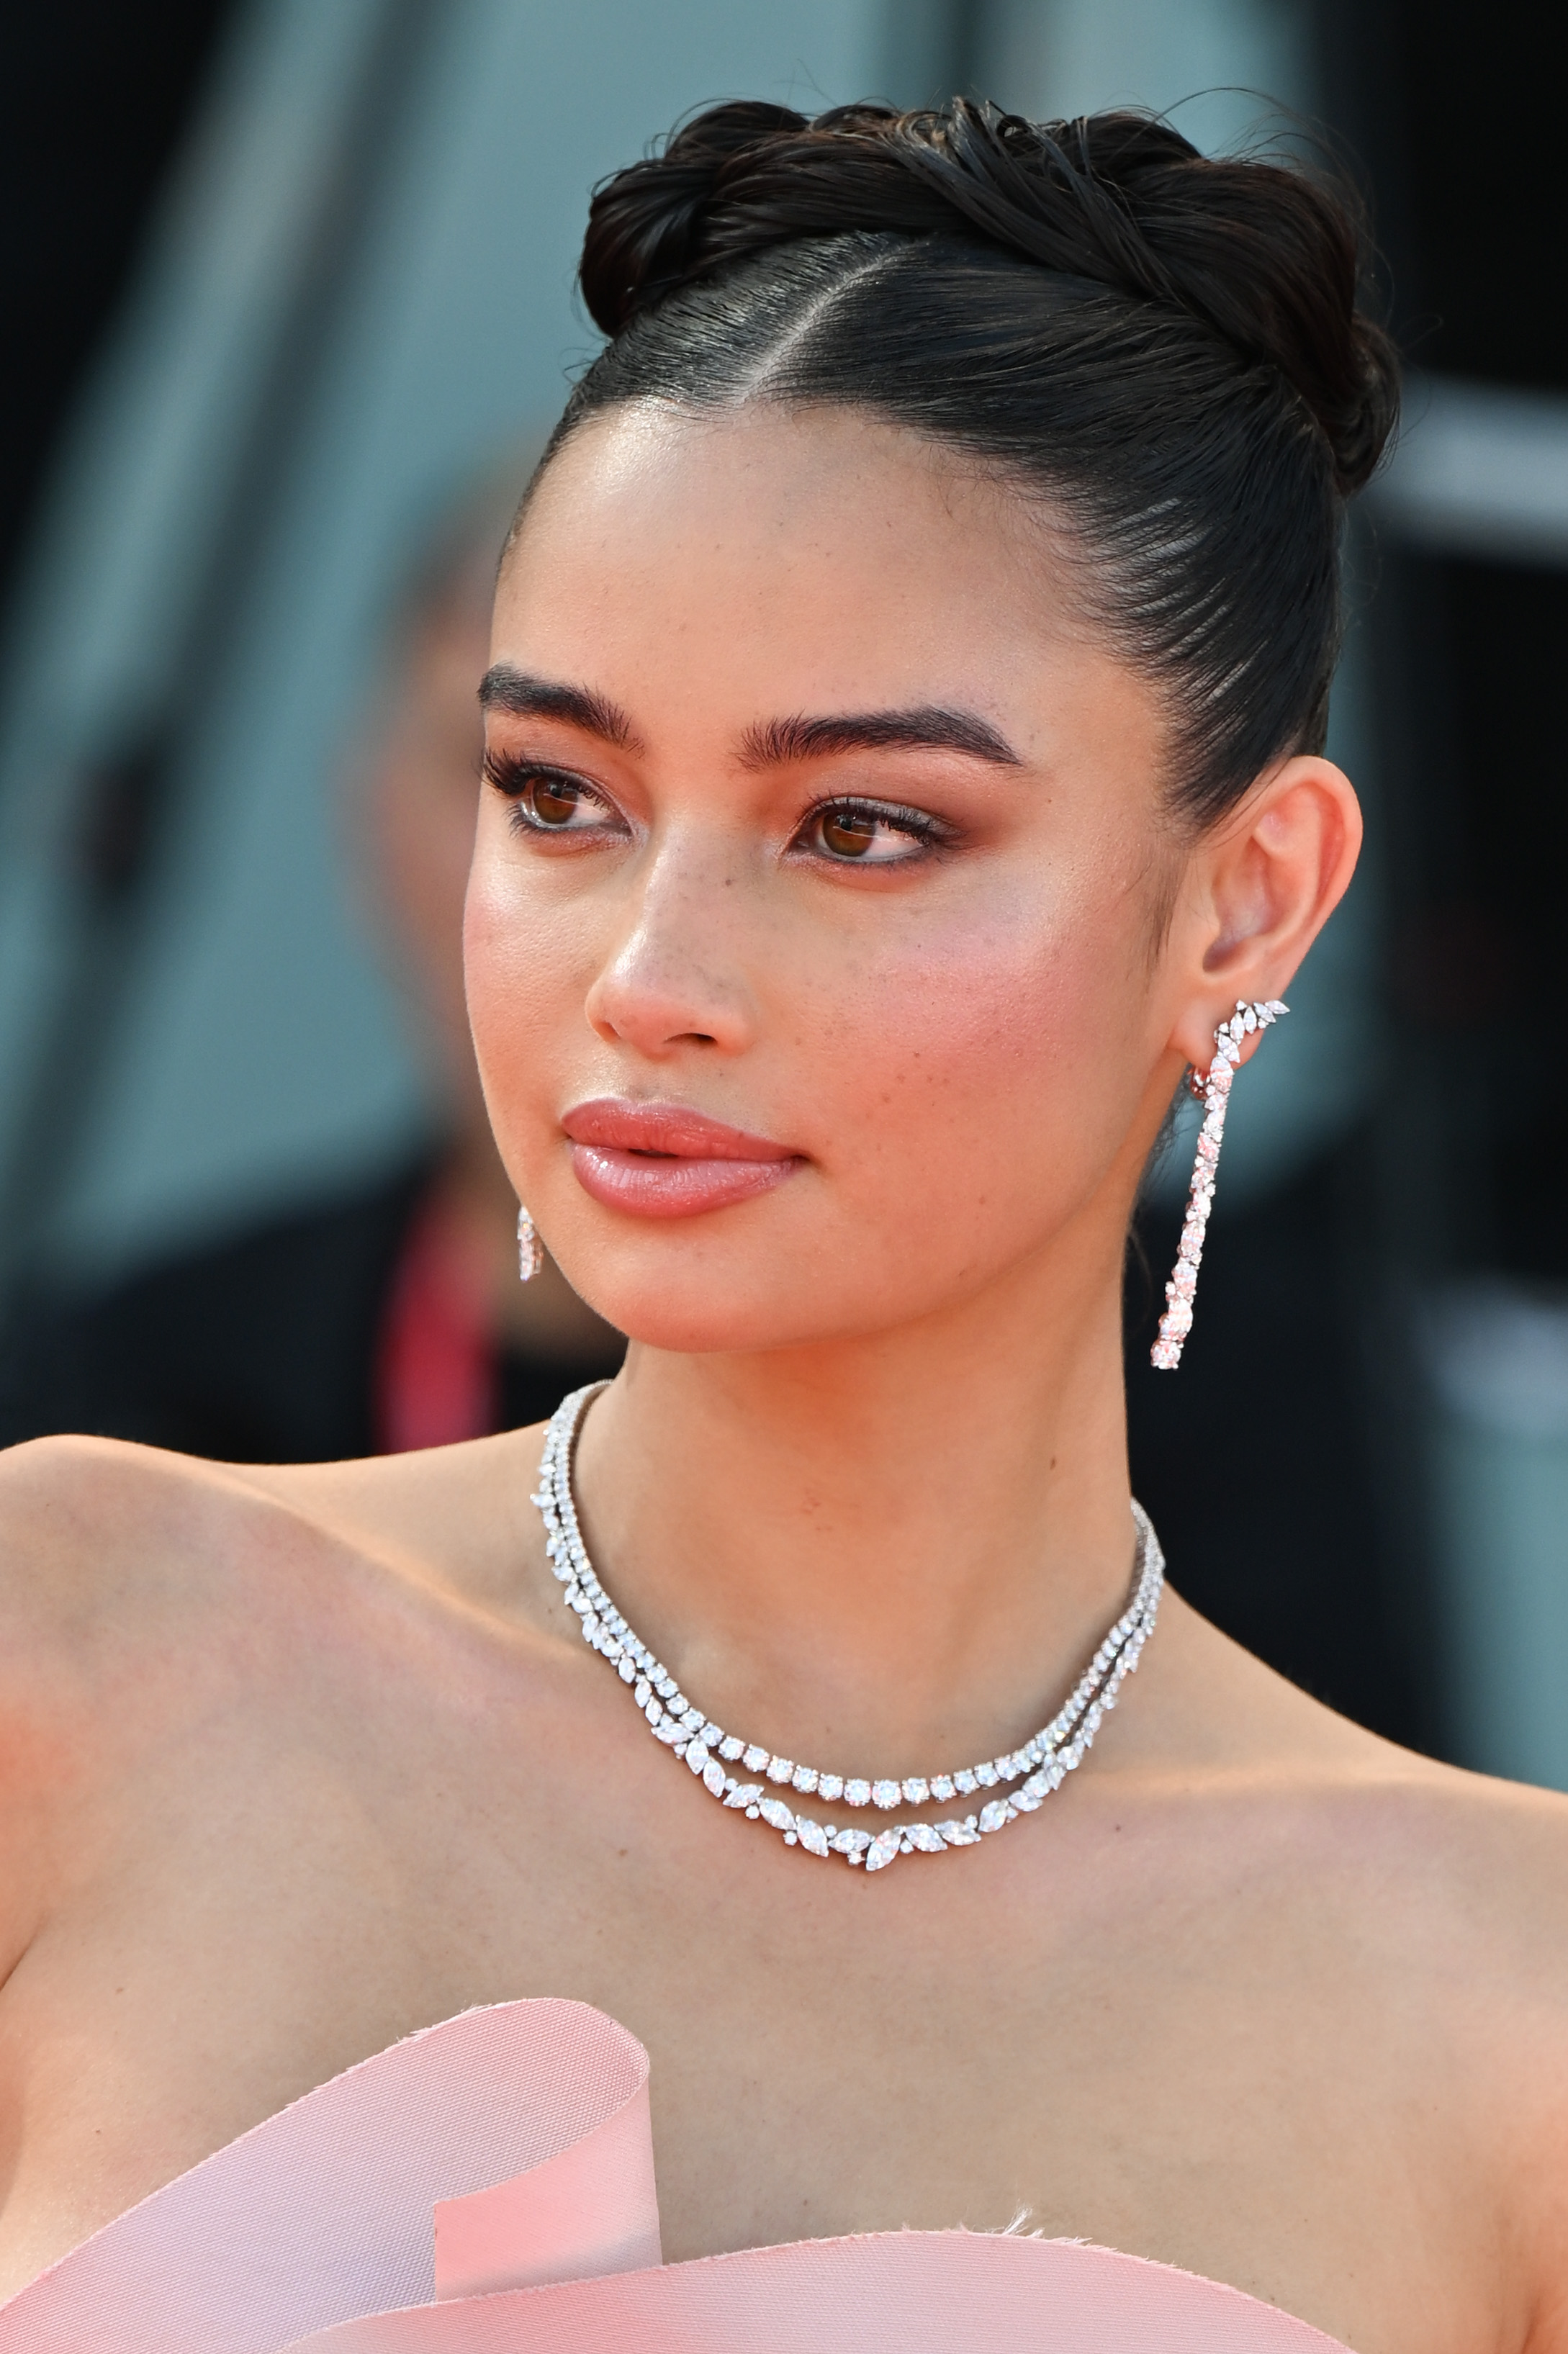 Kelsey Merritt poses at the "Tar" red carpet at the 79th Venice International Film Festival on September 1, 2022 in Venice, Italy | Source: Getty Images